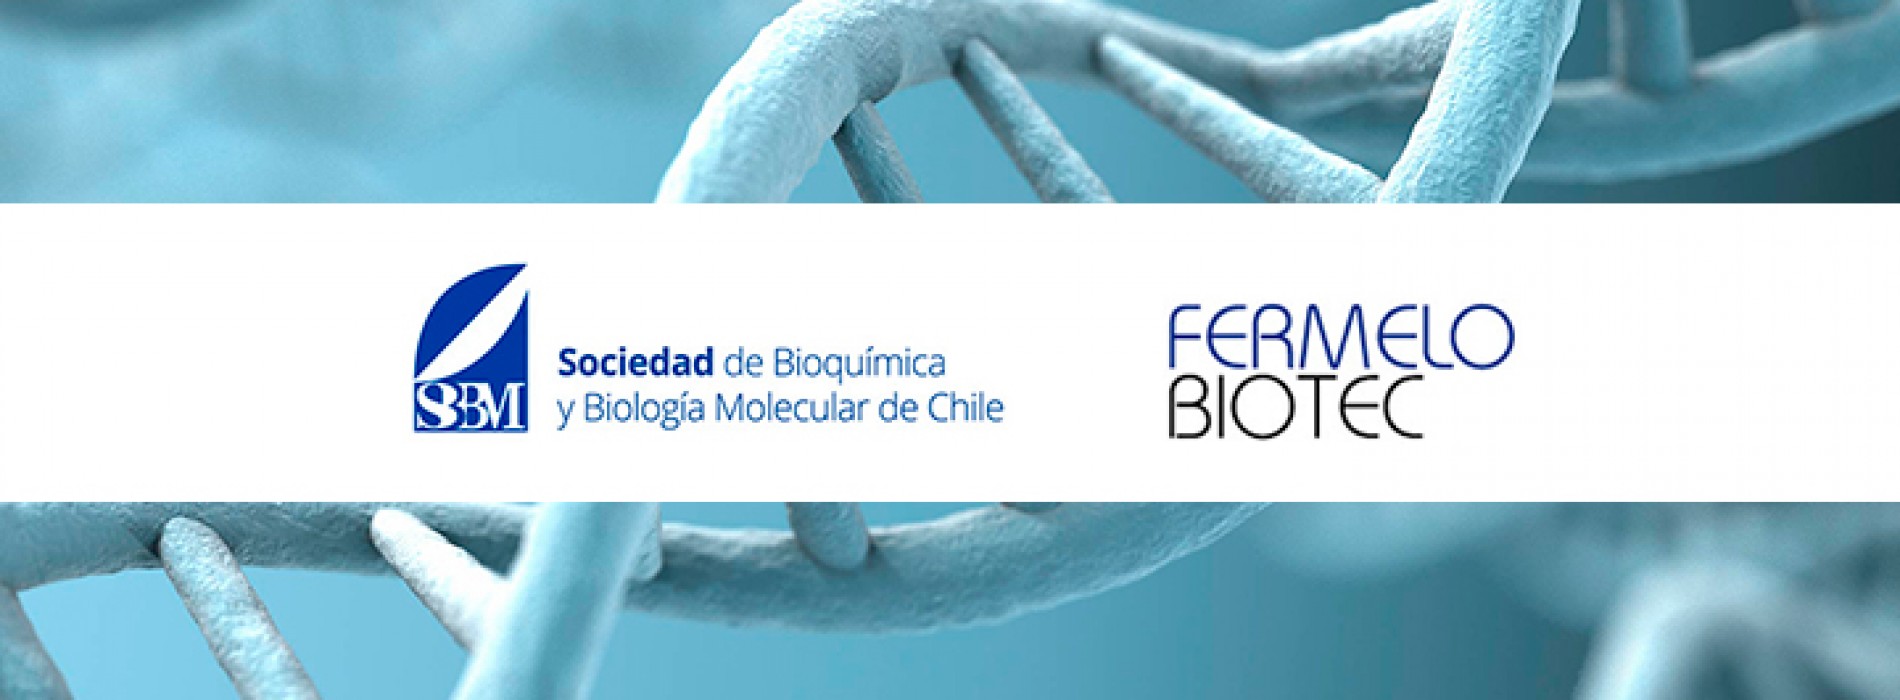 "SBBMCH and Fermelo Biotech: A history of cooperation, friendship and science"